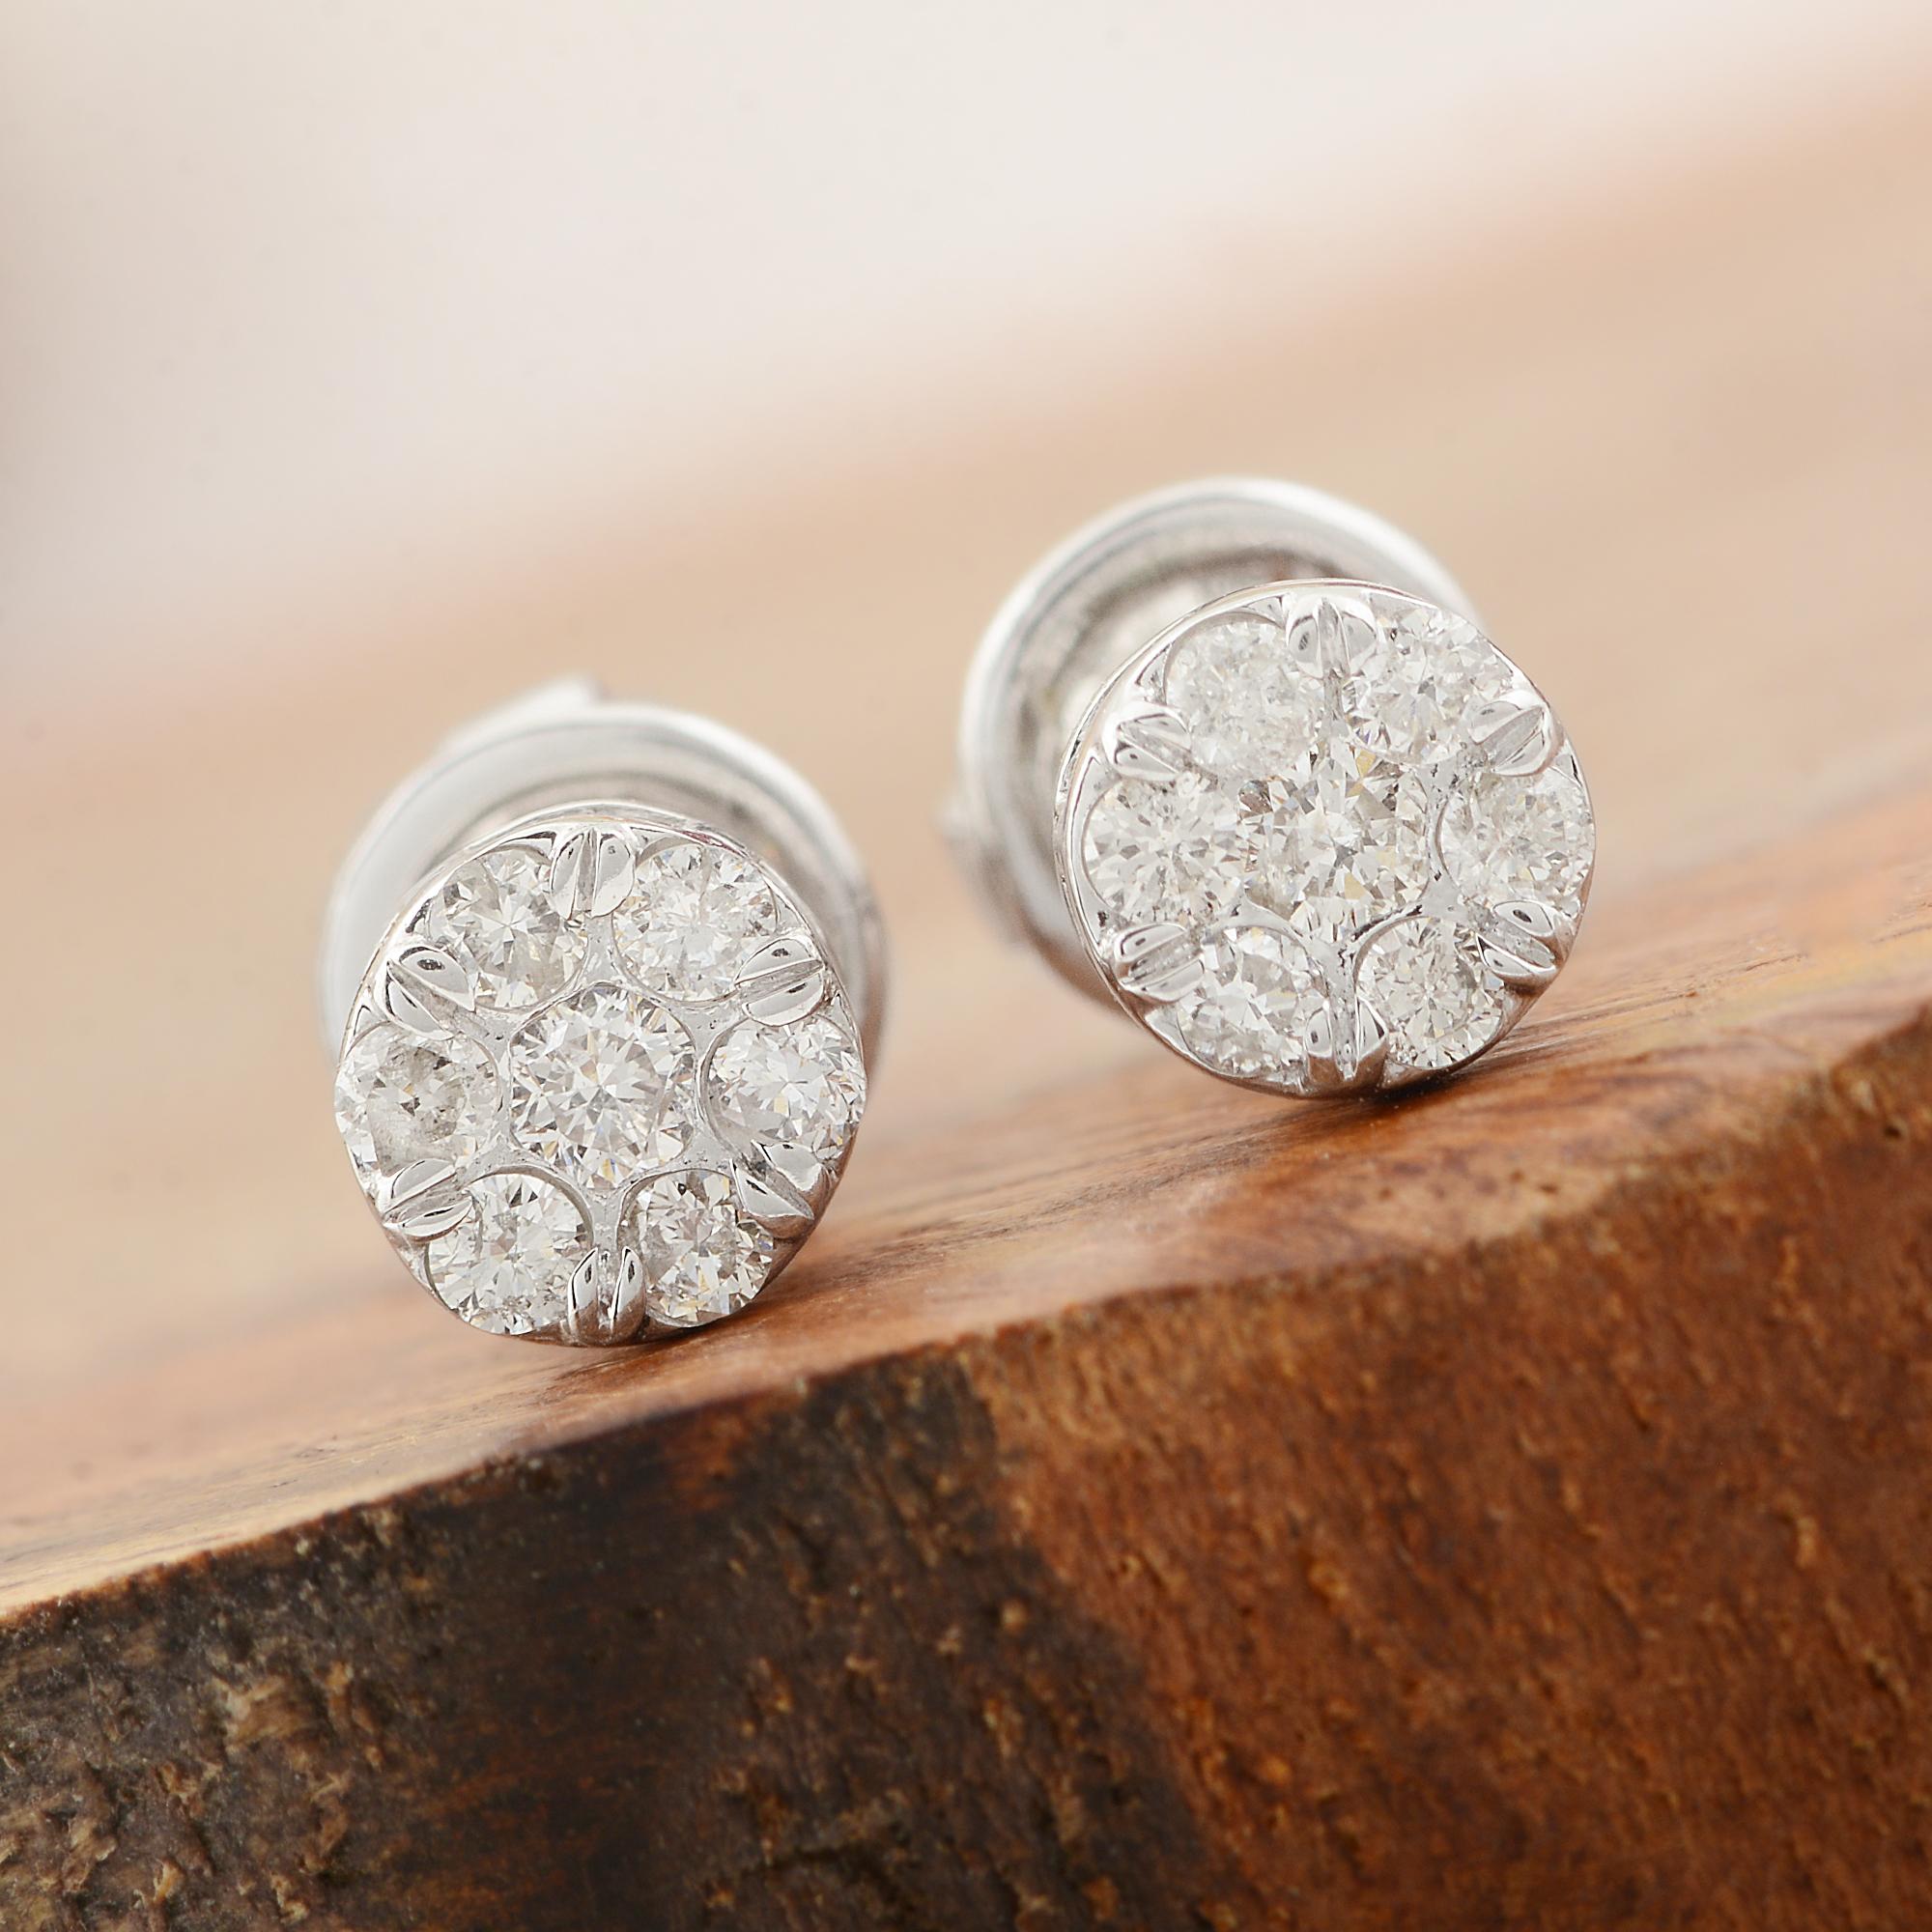 Set in solid 10 karat white gold, the minimalist design of these stud earrings allows the diamonds to take center stage, while the sleek and polished setting adds a touch of modern sophistication. The secure post and butterfly backings ensure